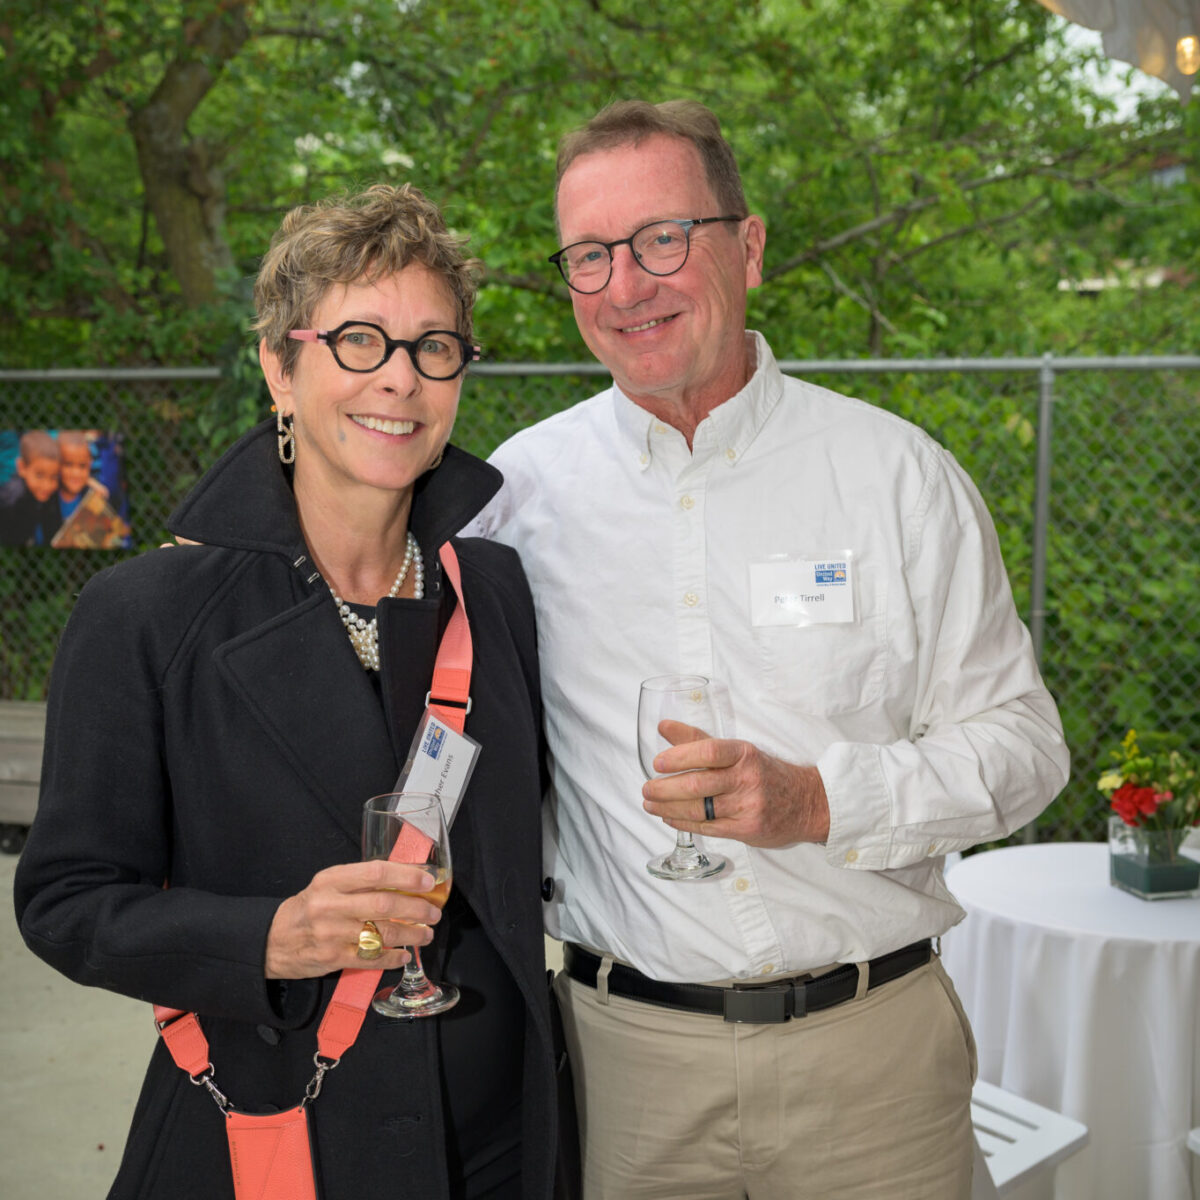 Heather Evans and Peter Tirrell, supporters of United Way of Rhode Island, pose for a photo.